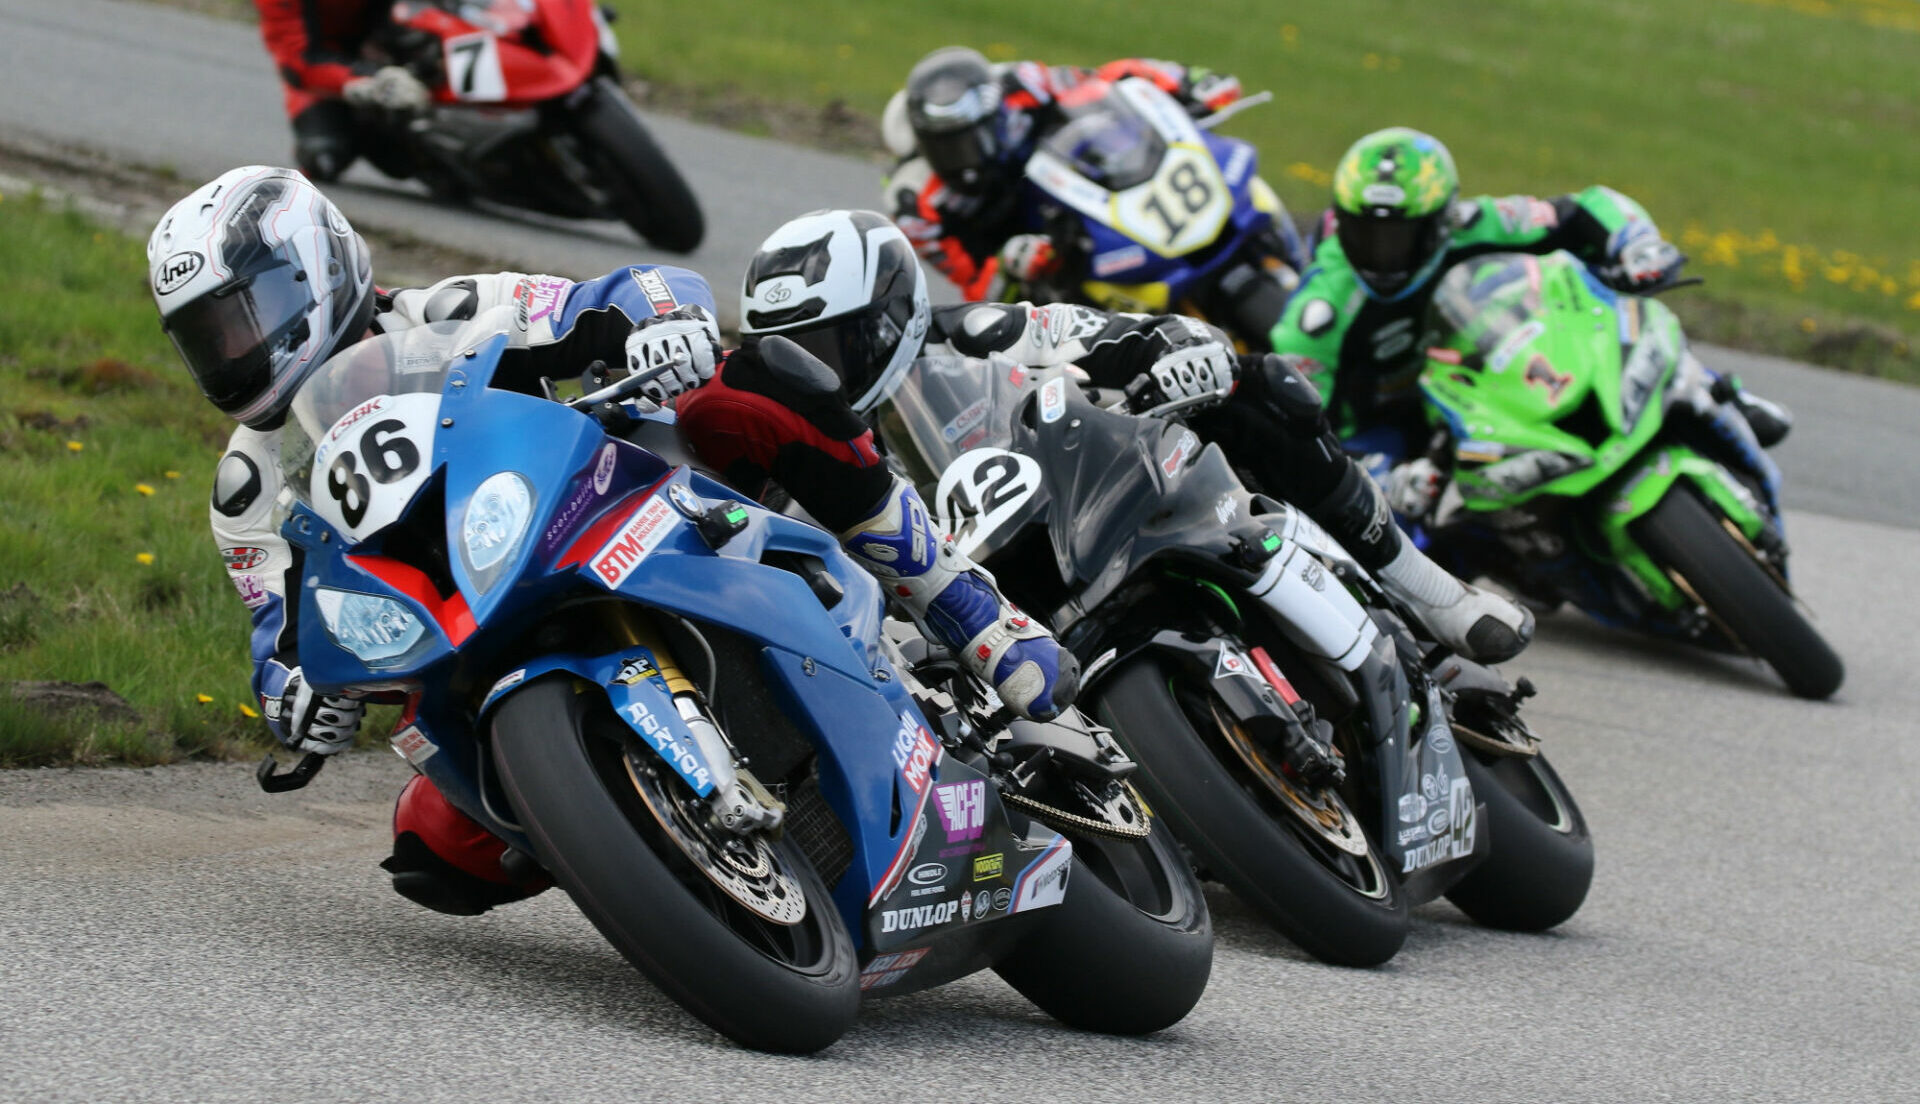 Action from the 2019 CSBK season-opener at Shannonville Motorsport Park, where eventual winner Ben Young (86) led Kenny Riedmann (42), Jordan Szoke (1), Tomas Casas (18), and Jeff Williams (7). Photo by Rob O'Brien, courtesy CSBK/PMP.